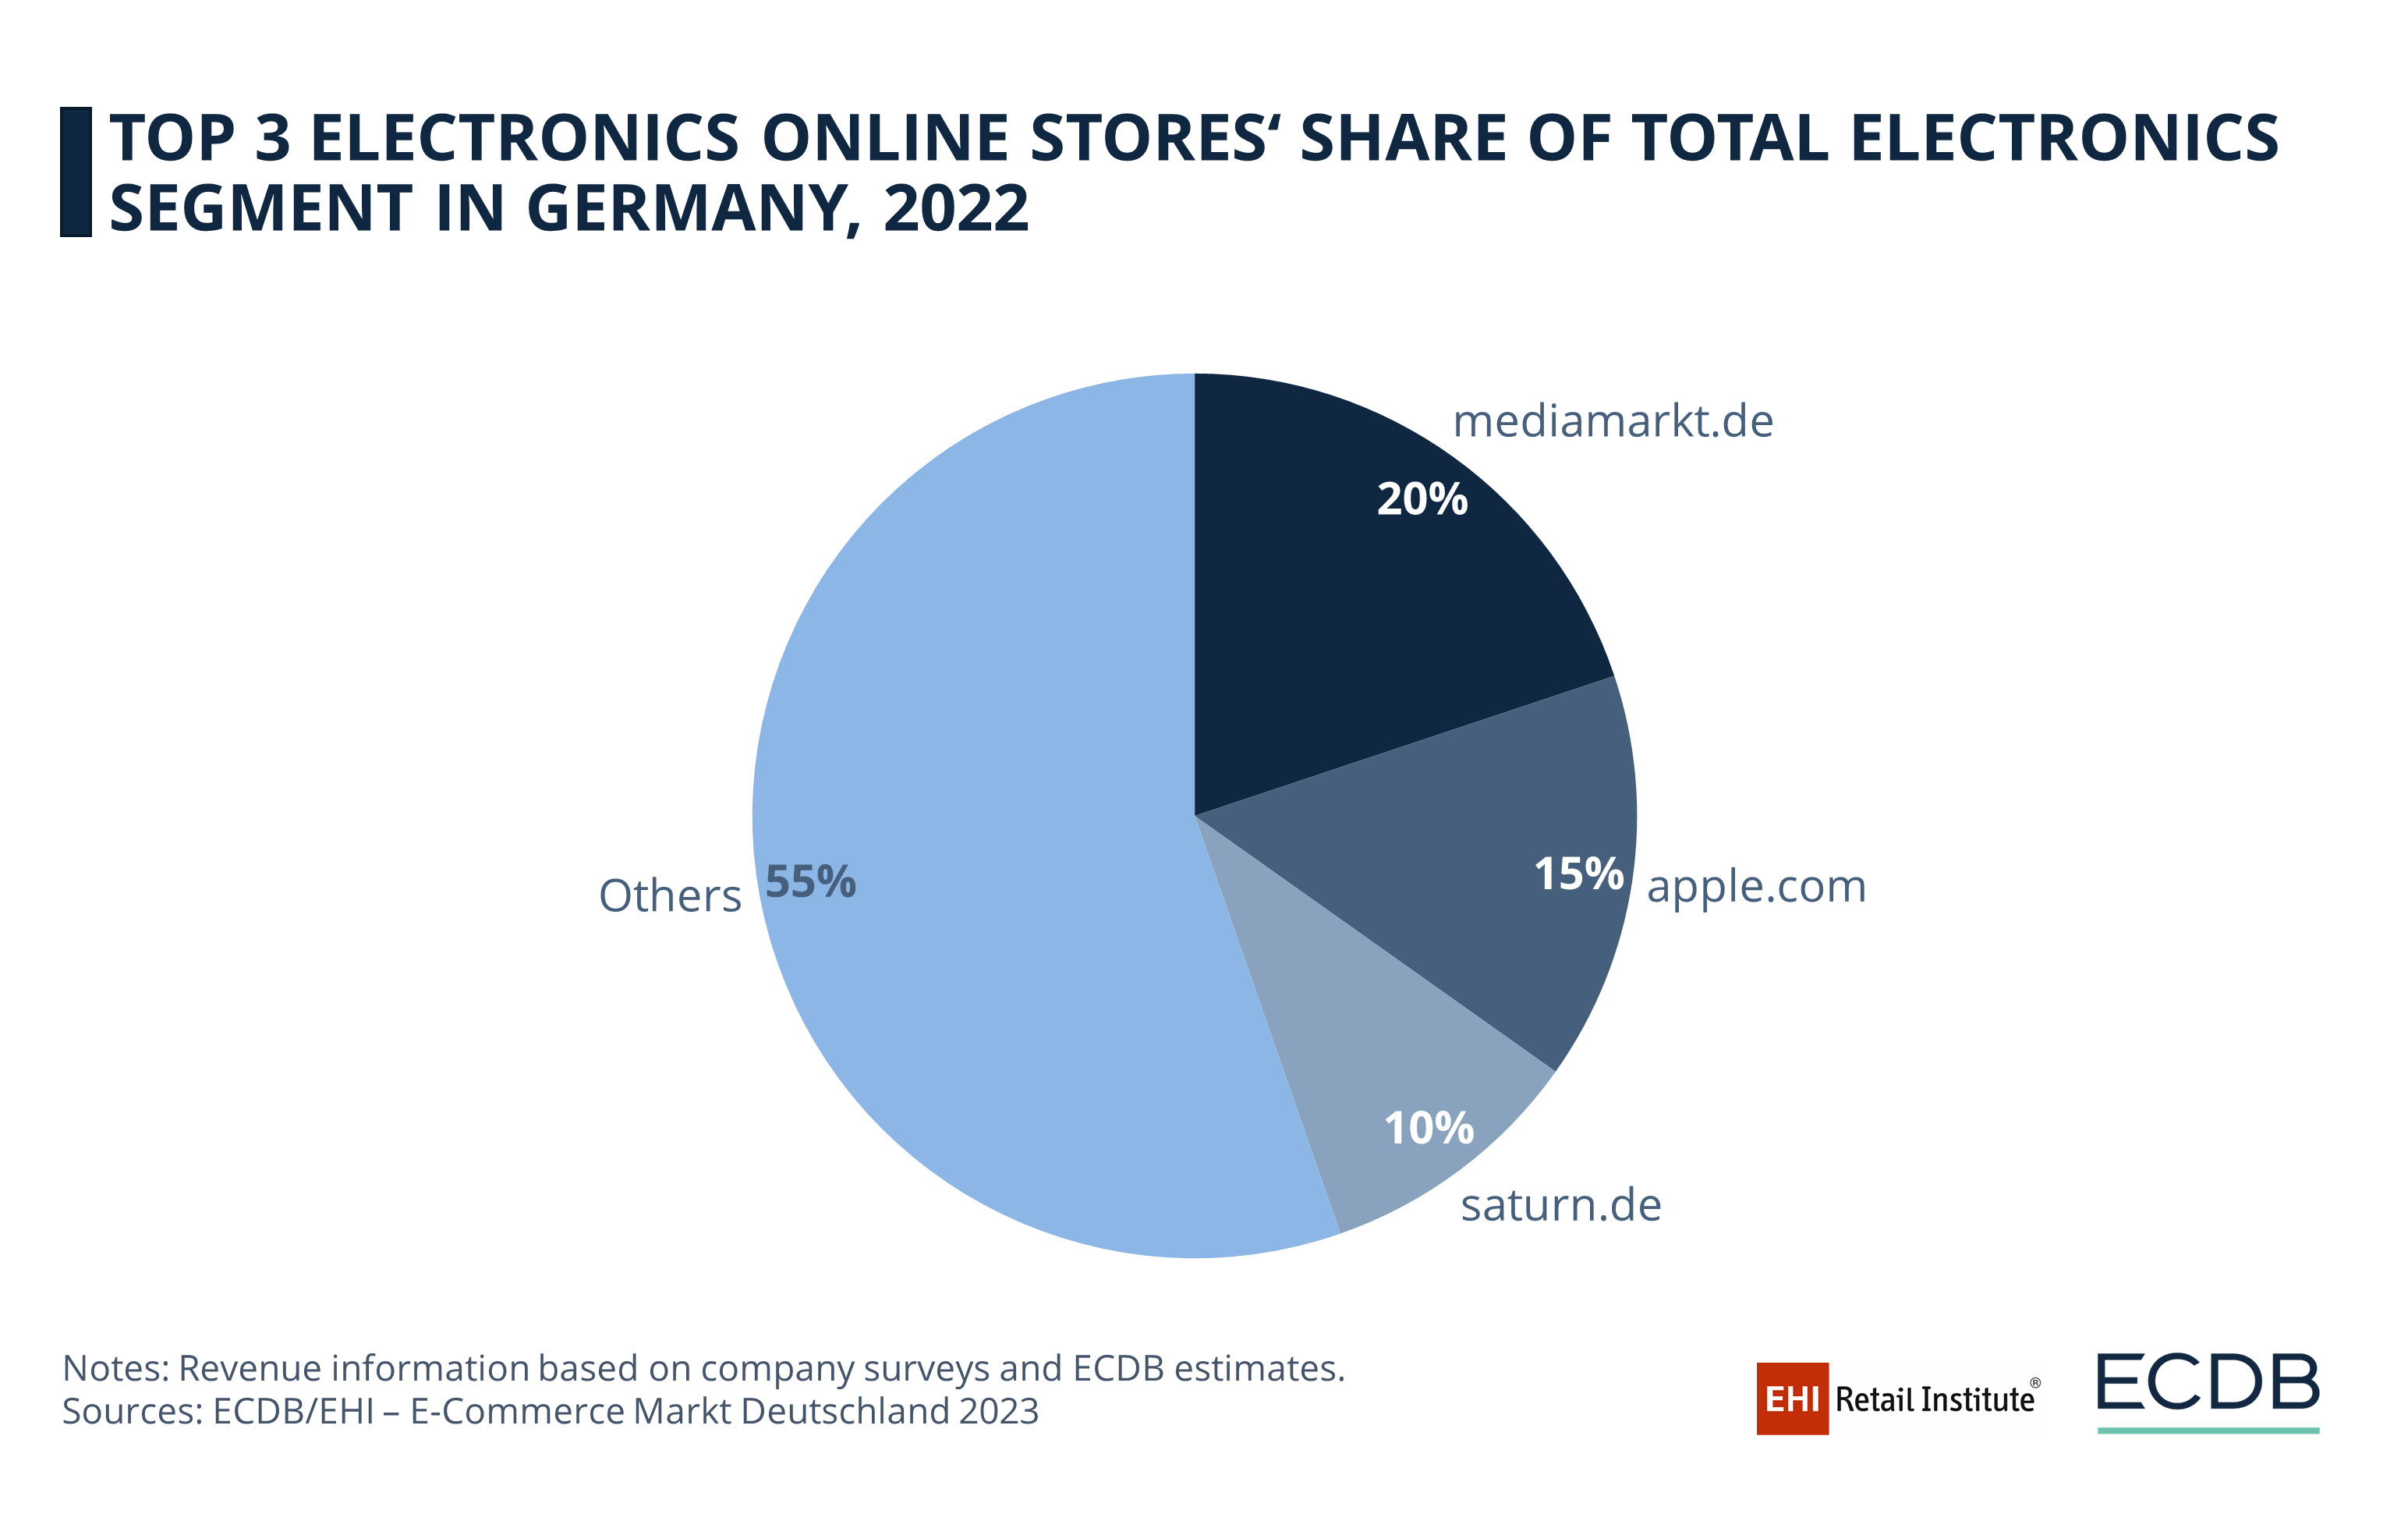 Top 3 Electronics Online Stores' Share of Total Electronics Segment in Germany, 2022